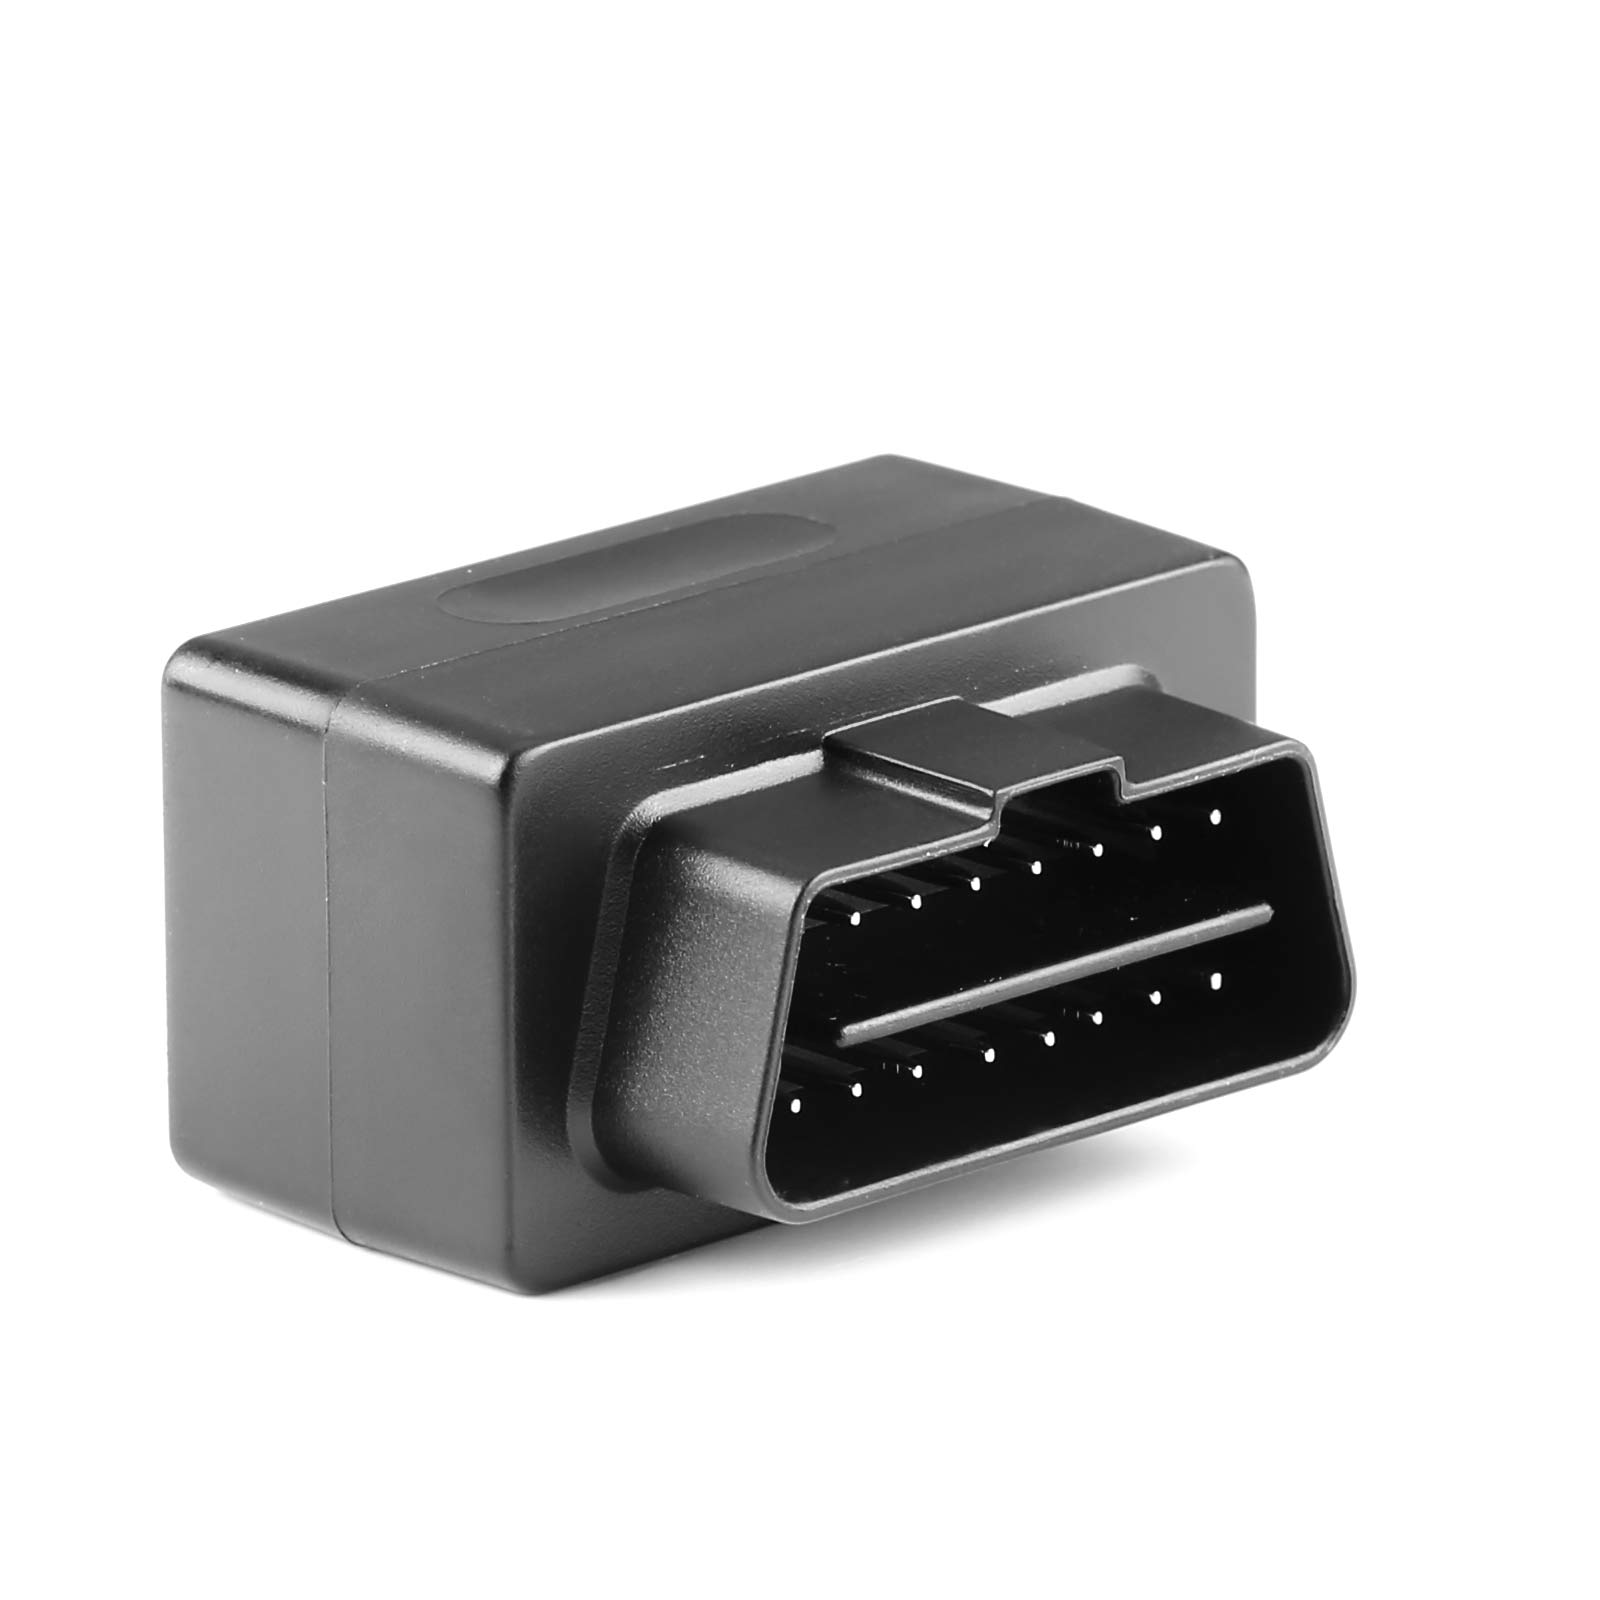 OBD Plug Adapter for BMW Enet Ethernet to OBD 2 Interface